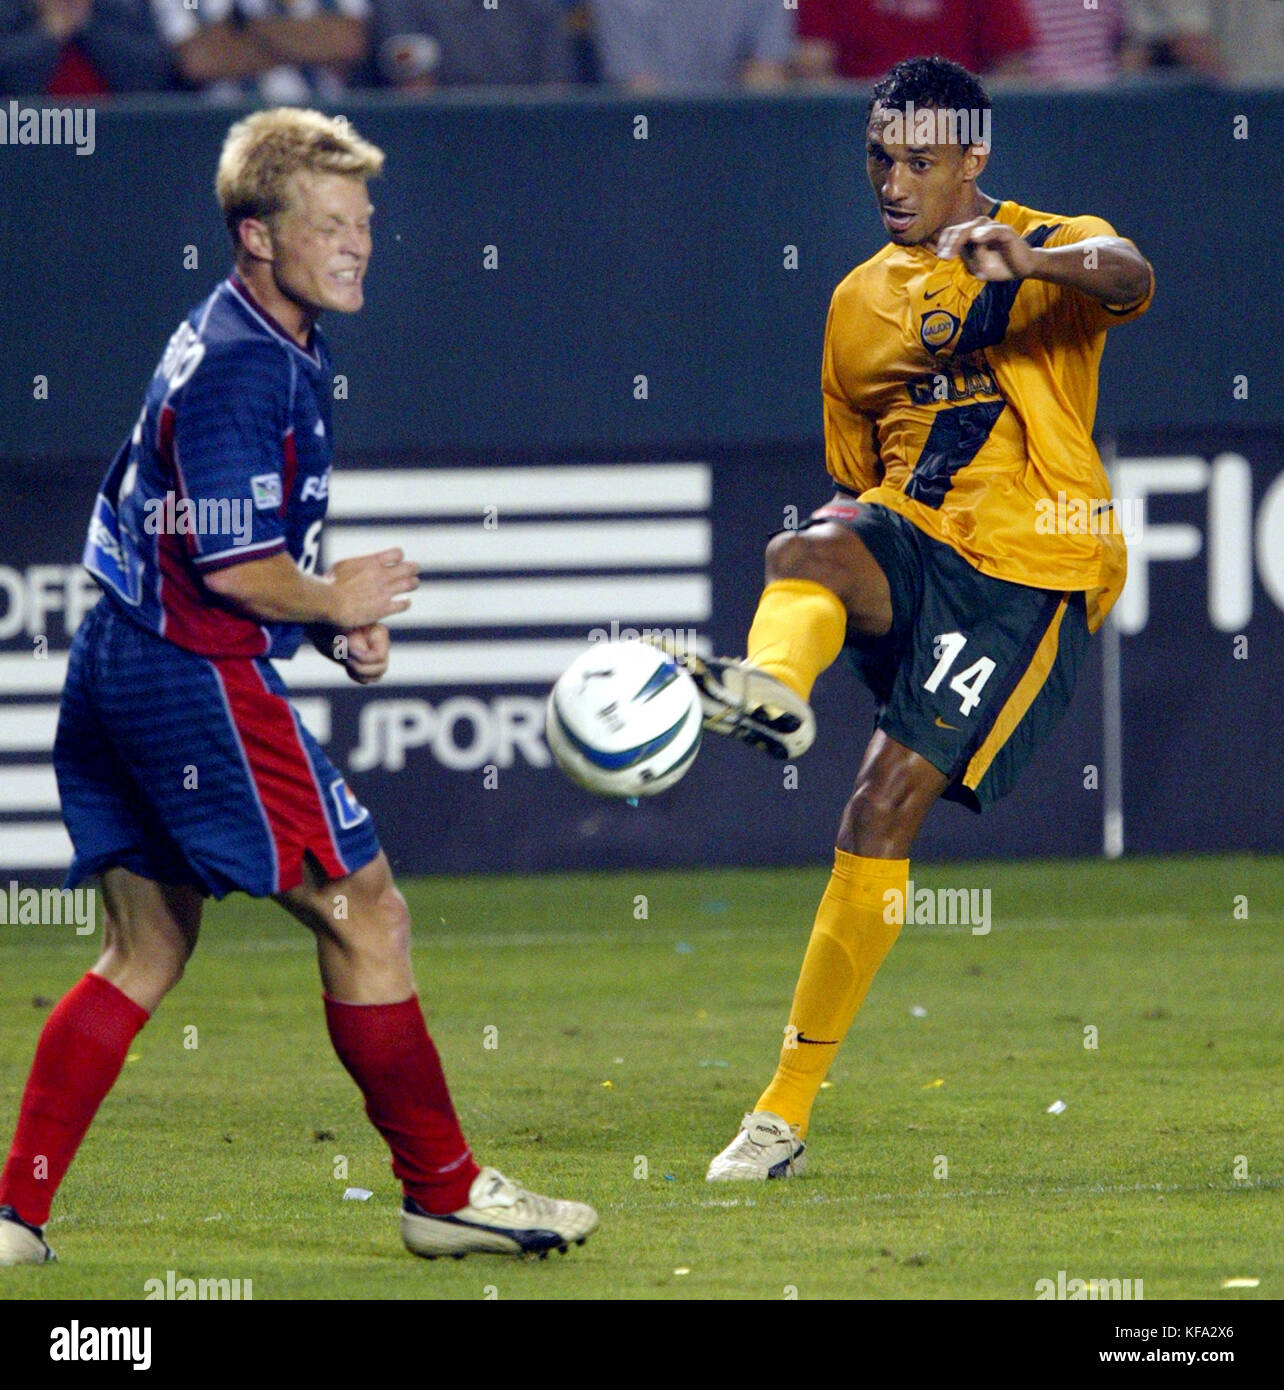 Galaxy's Tyrone Marshall, right, kicks the ball as Revolution's Joe Franchino defends during the second overtime on Friday July, 4, 2003 at the Home Depot Center in Carson, Calif. The game ended in a 2-2 tie. Photo by Francis Specker Stock Photo